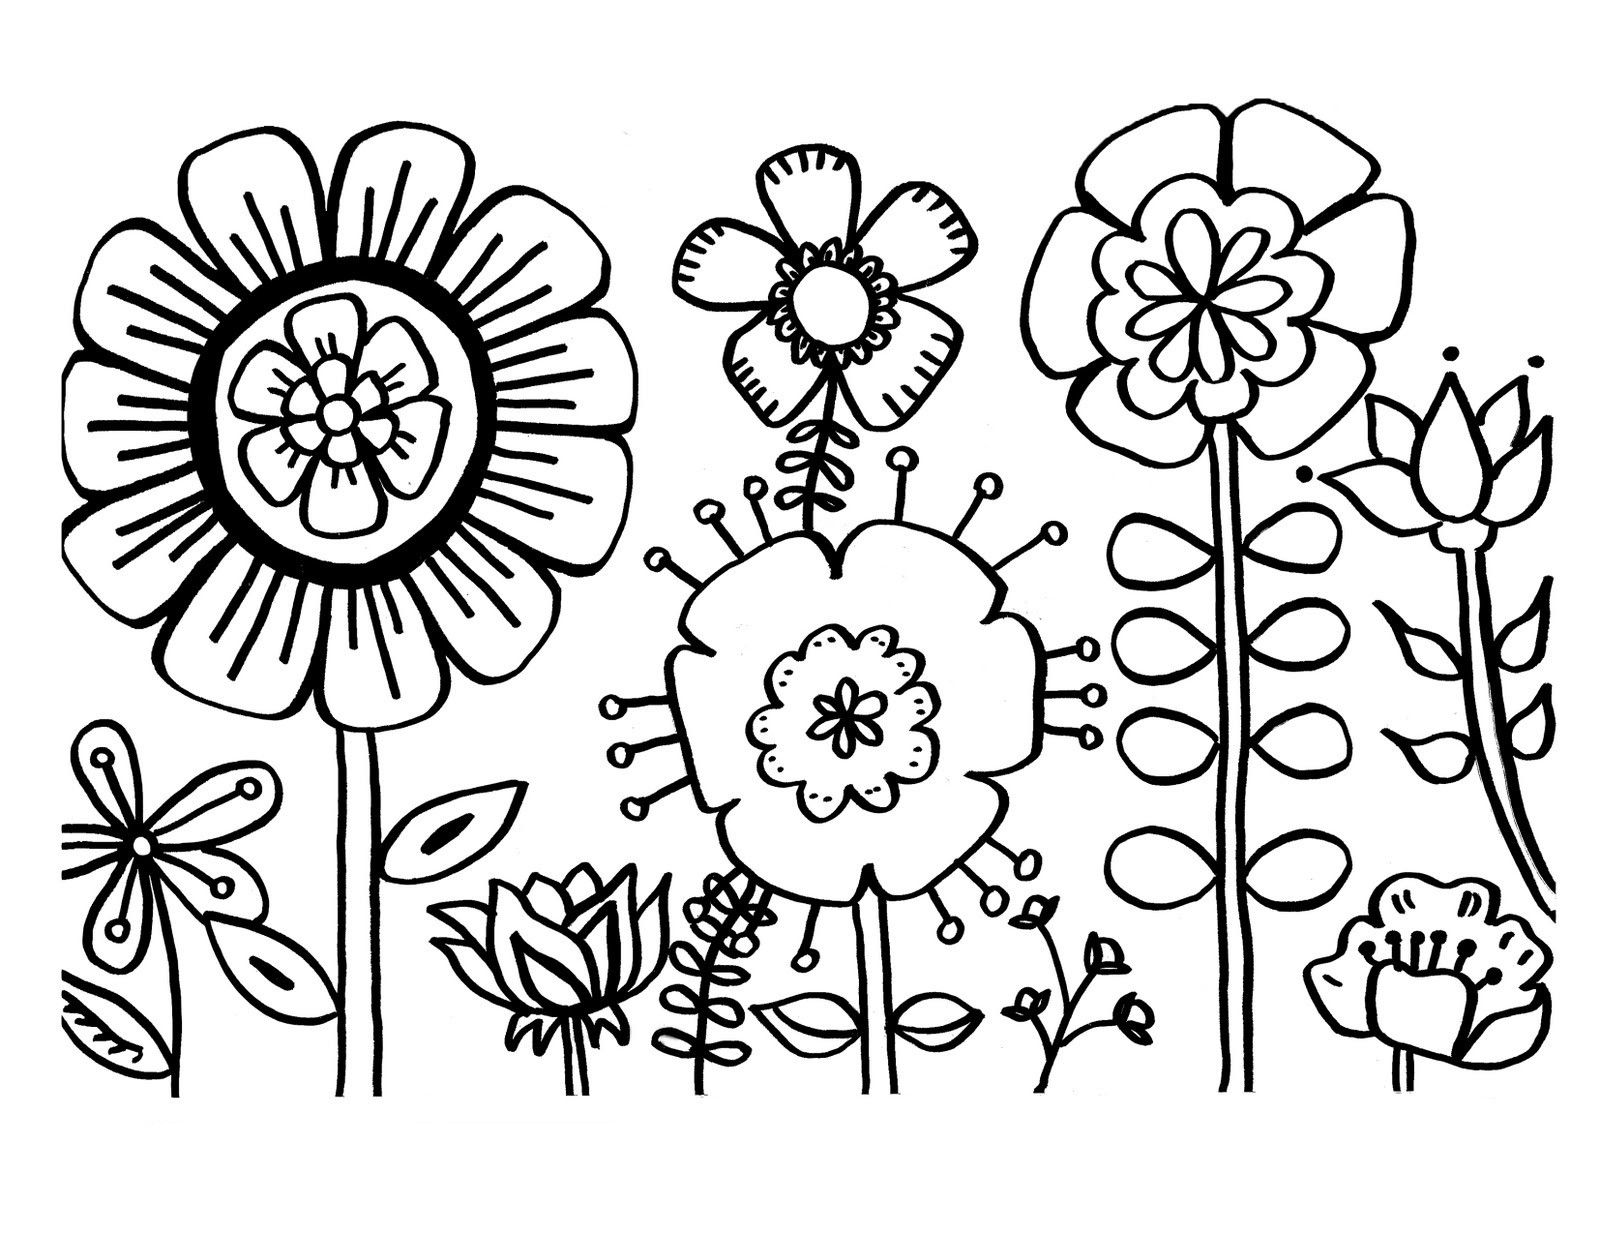 Zinnia Flower Doodles Coloring Pages   Coloring Cool